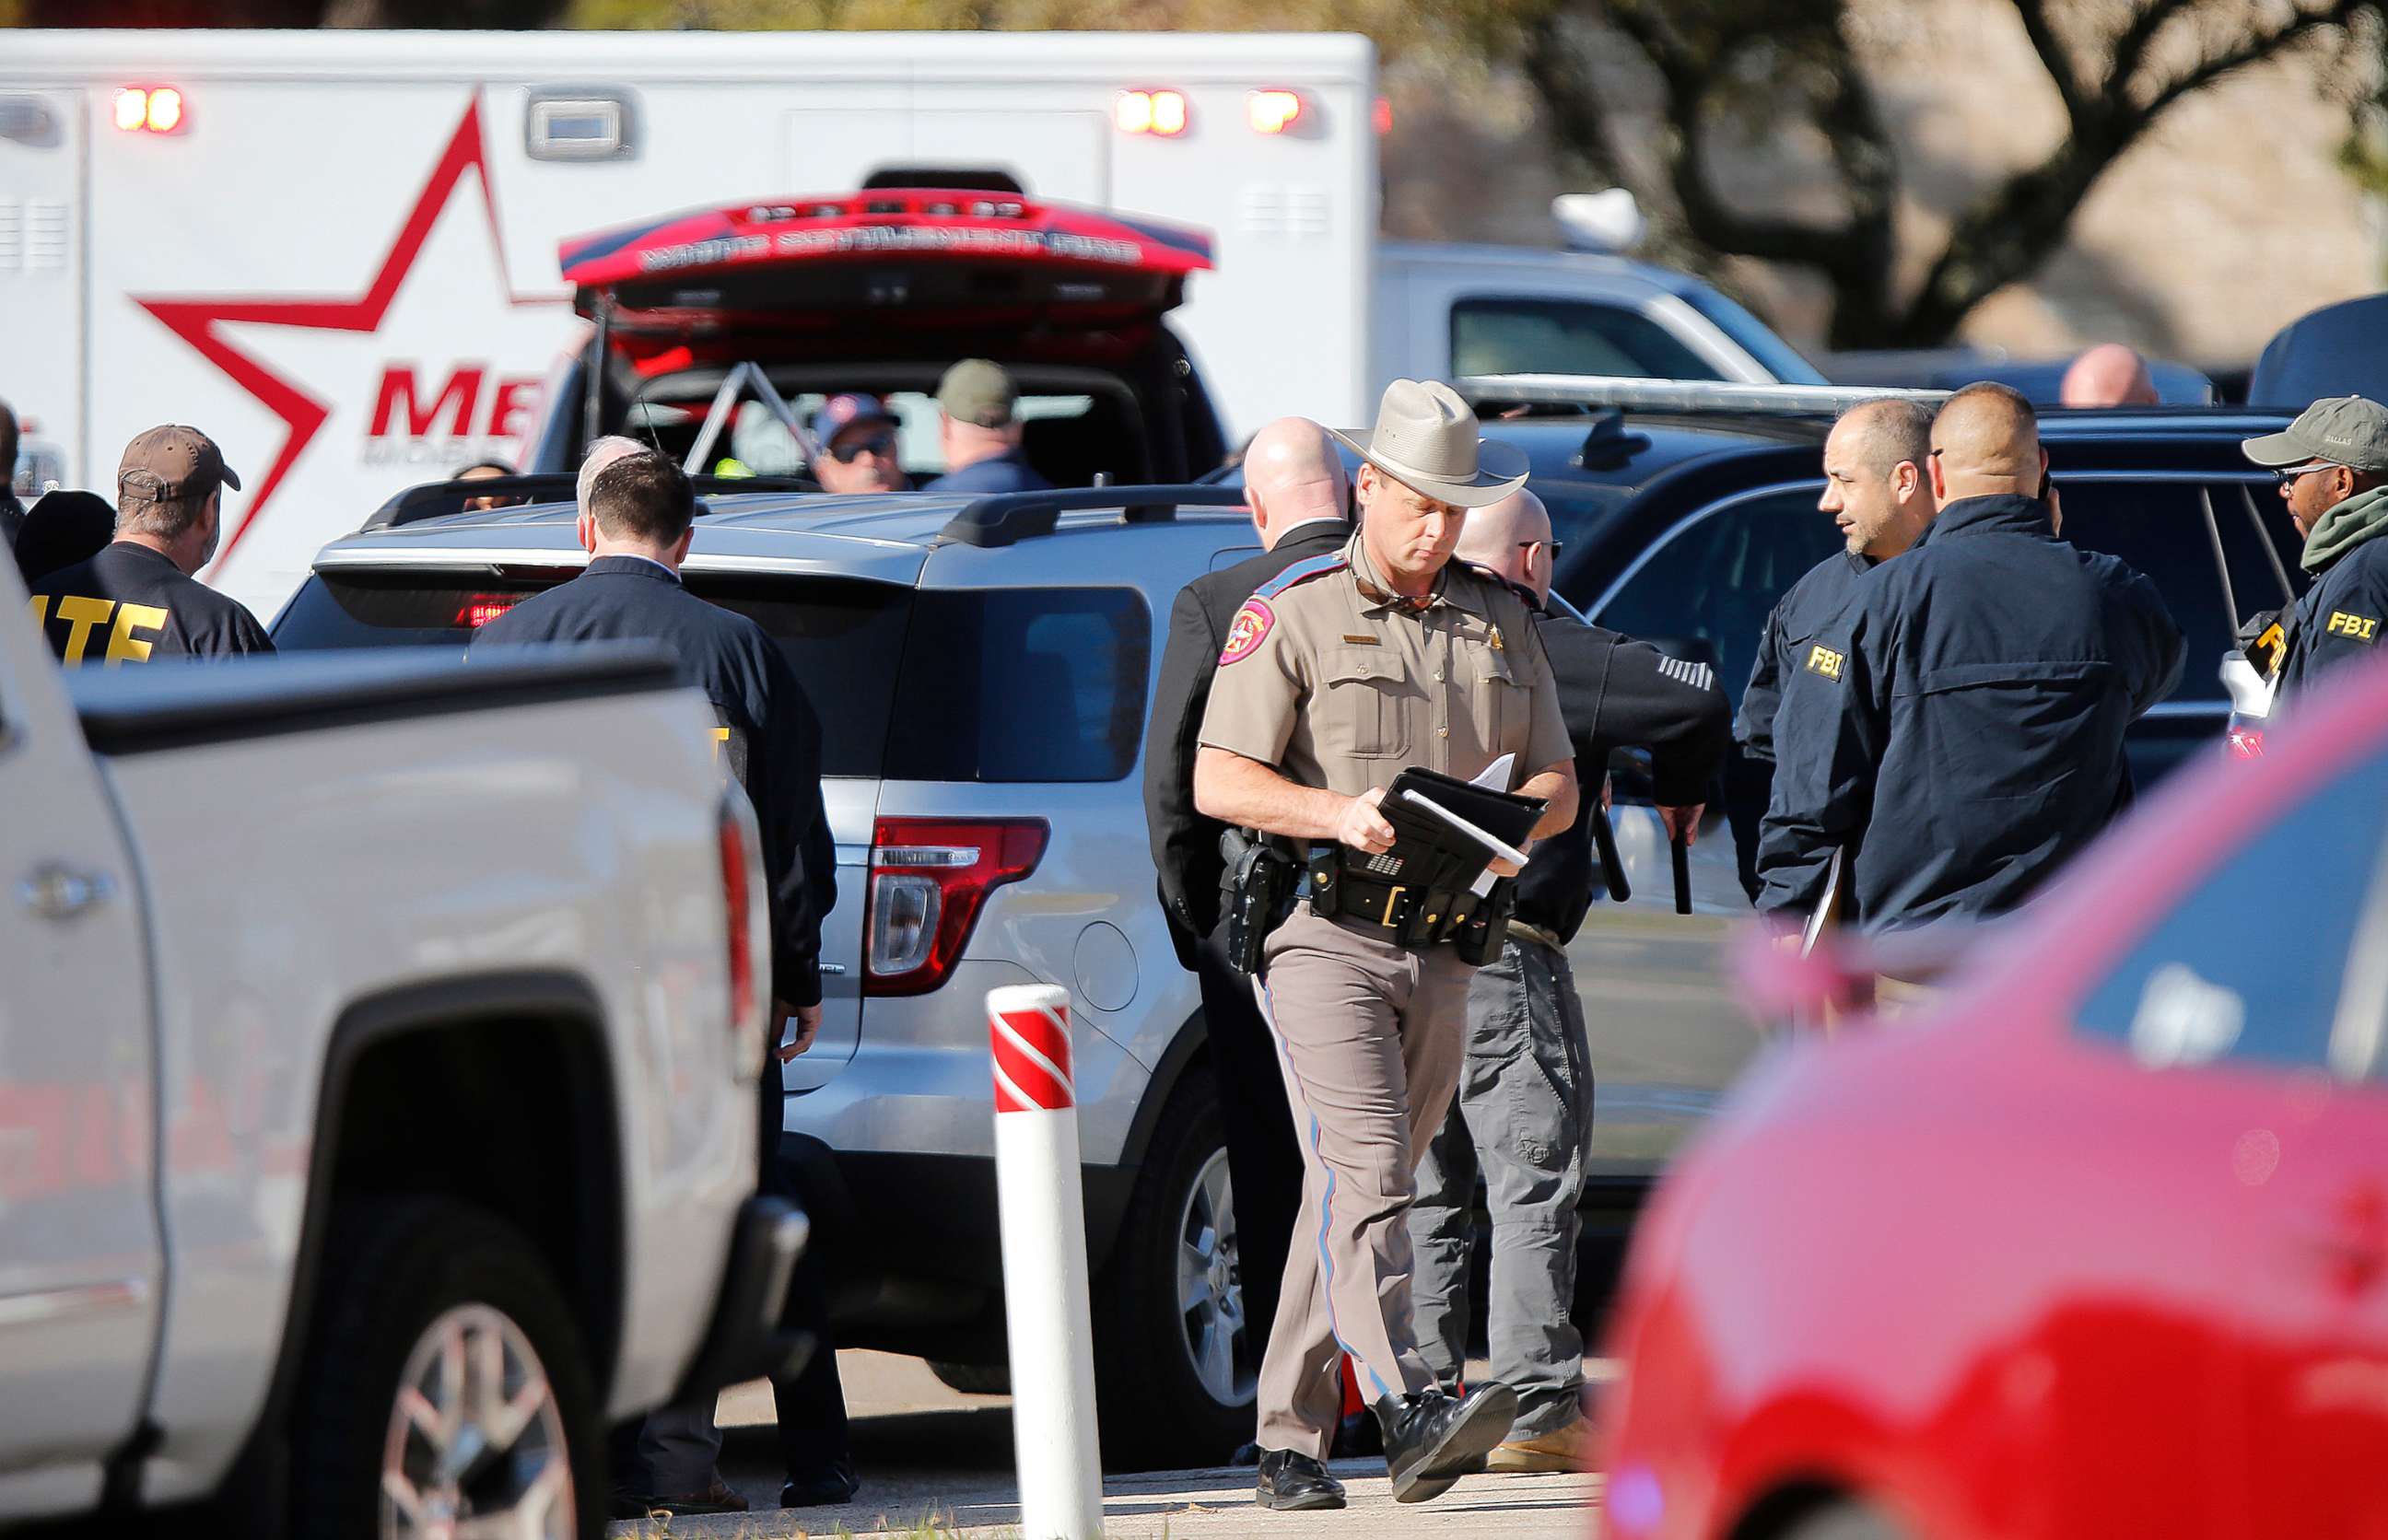 PHOTO: Authorities work the scene after a shooting took place during services at West Freeway Church of Christ, Dec. 29, 2019, in White Settlement, Texas.